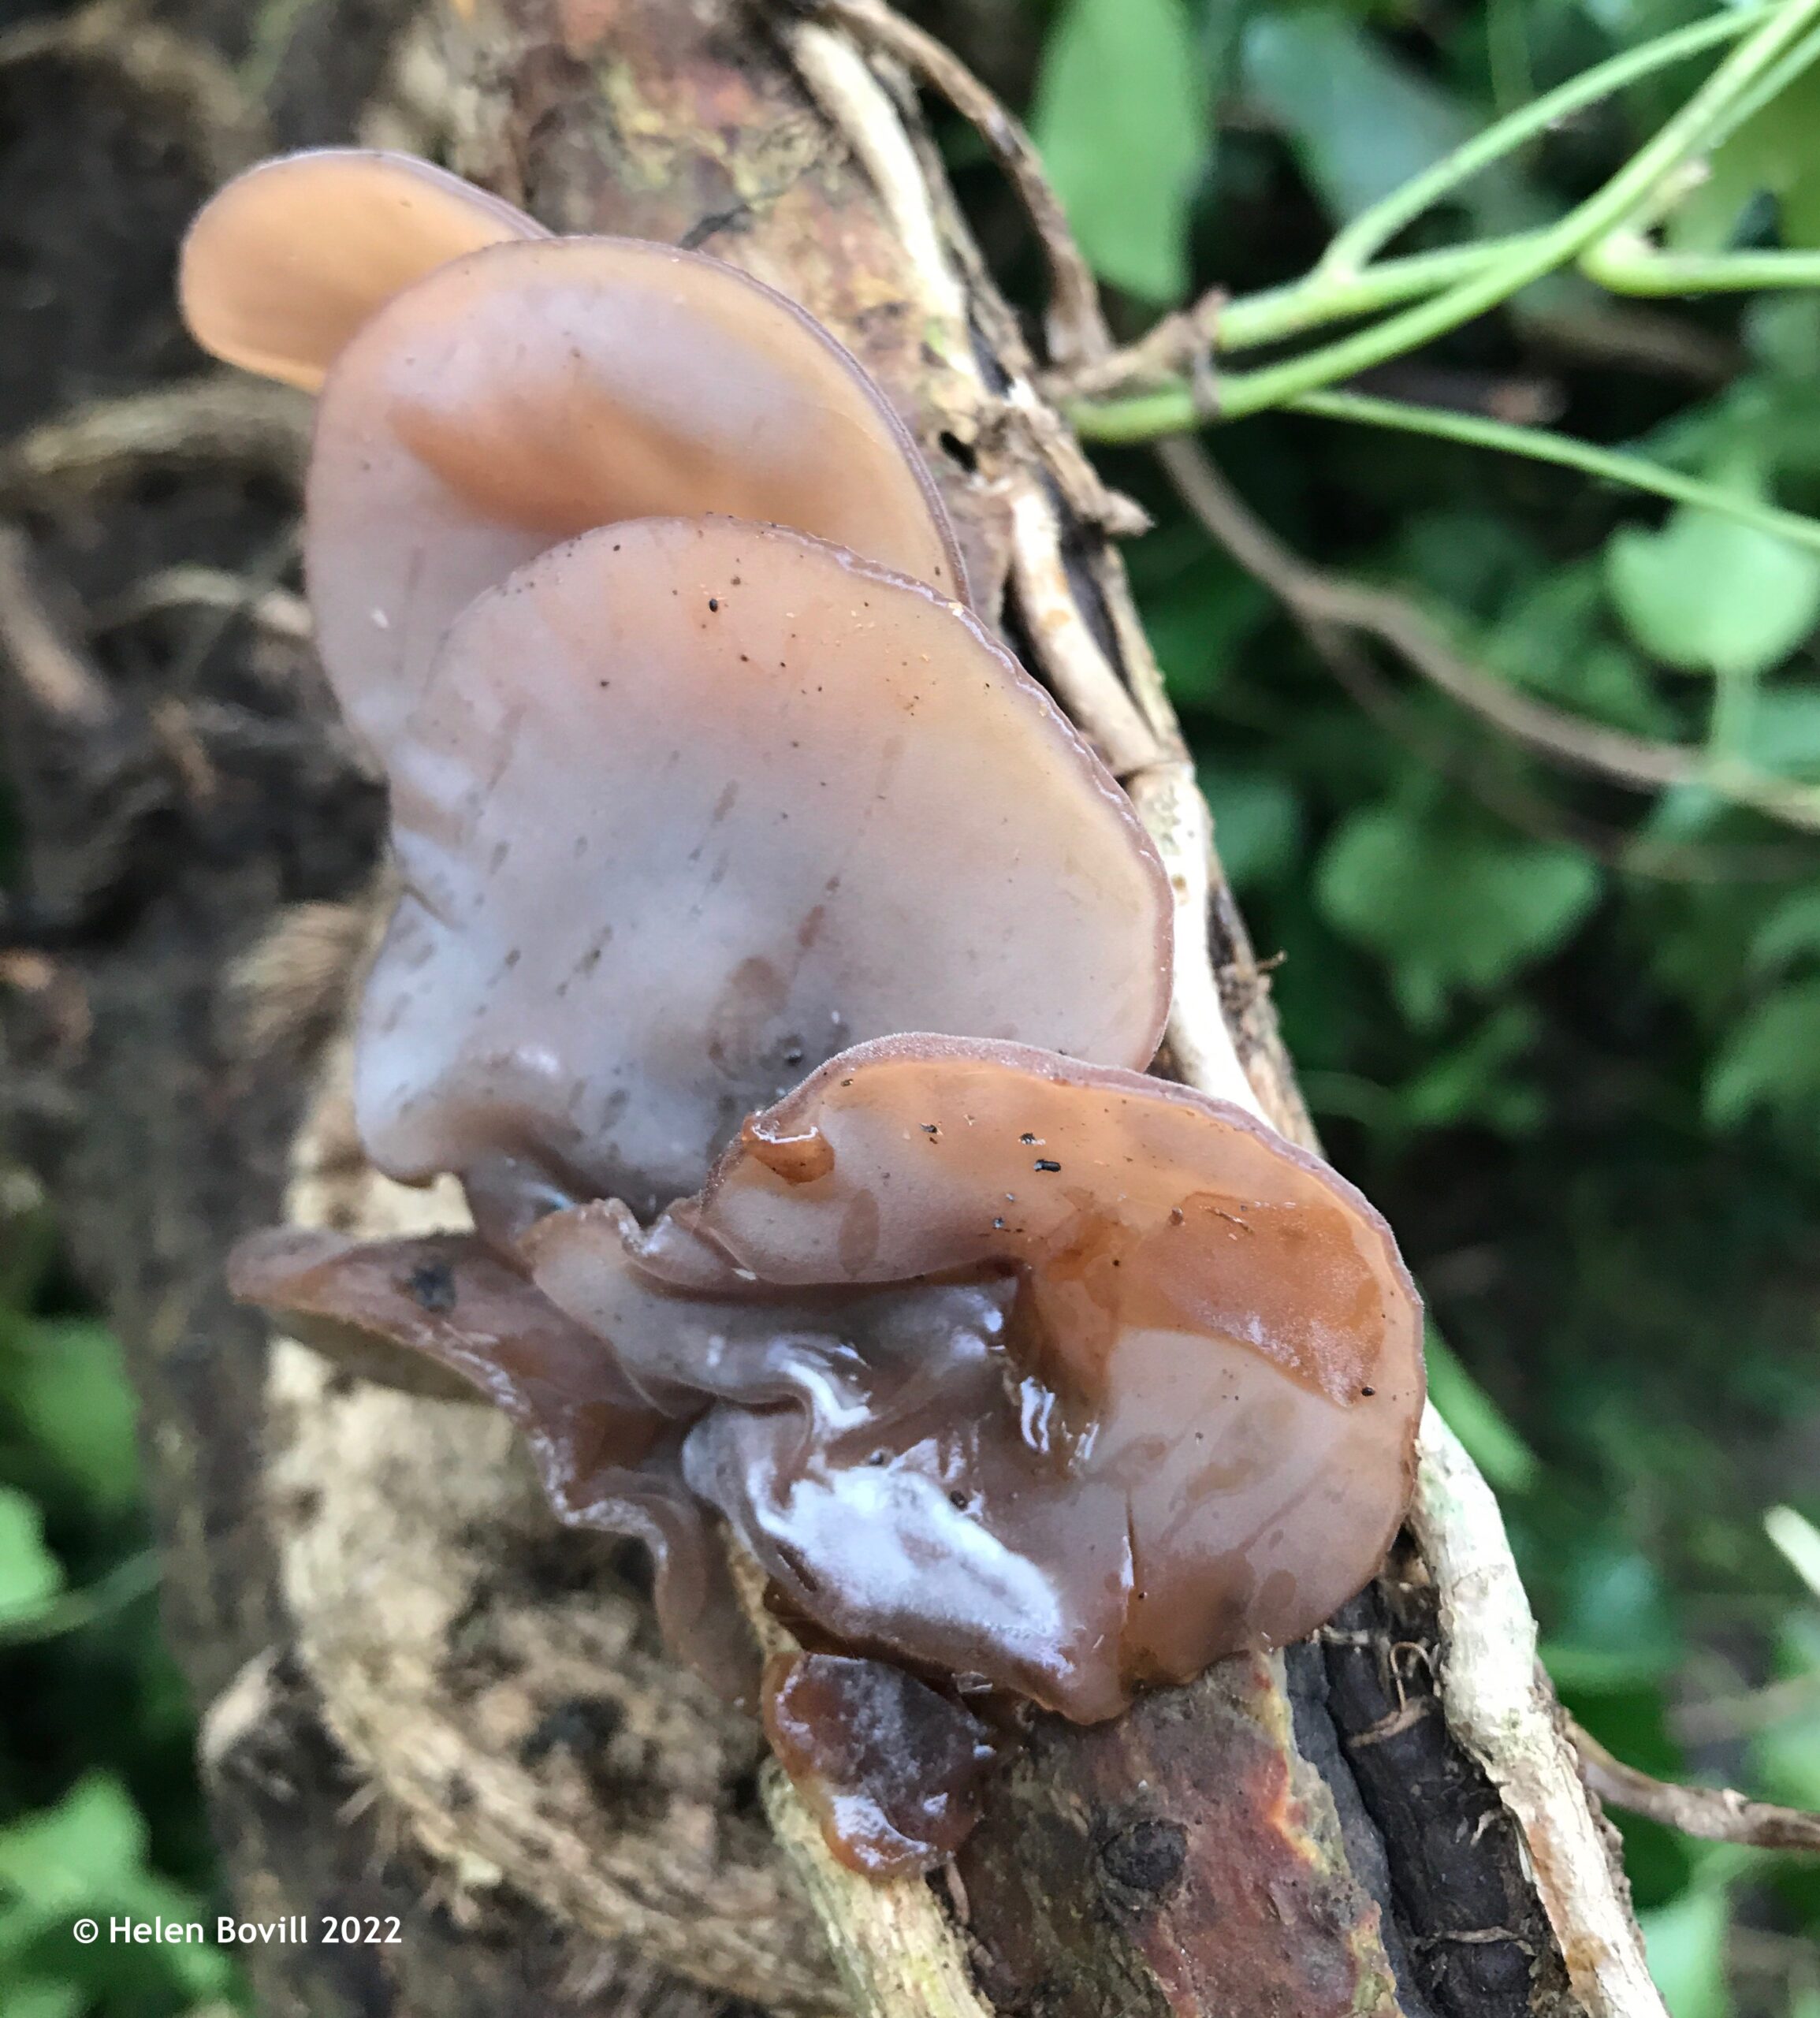 Jelly-type fungus on a fallen tree in the cemetery